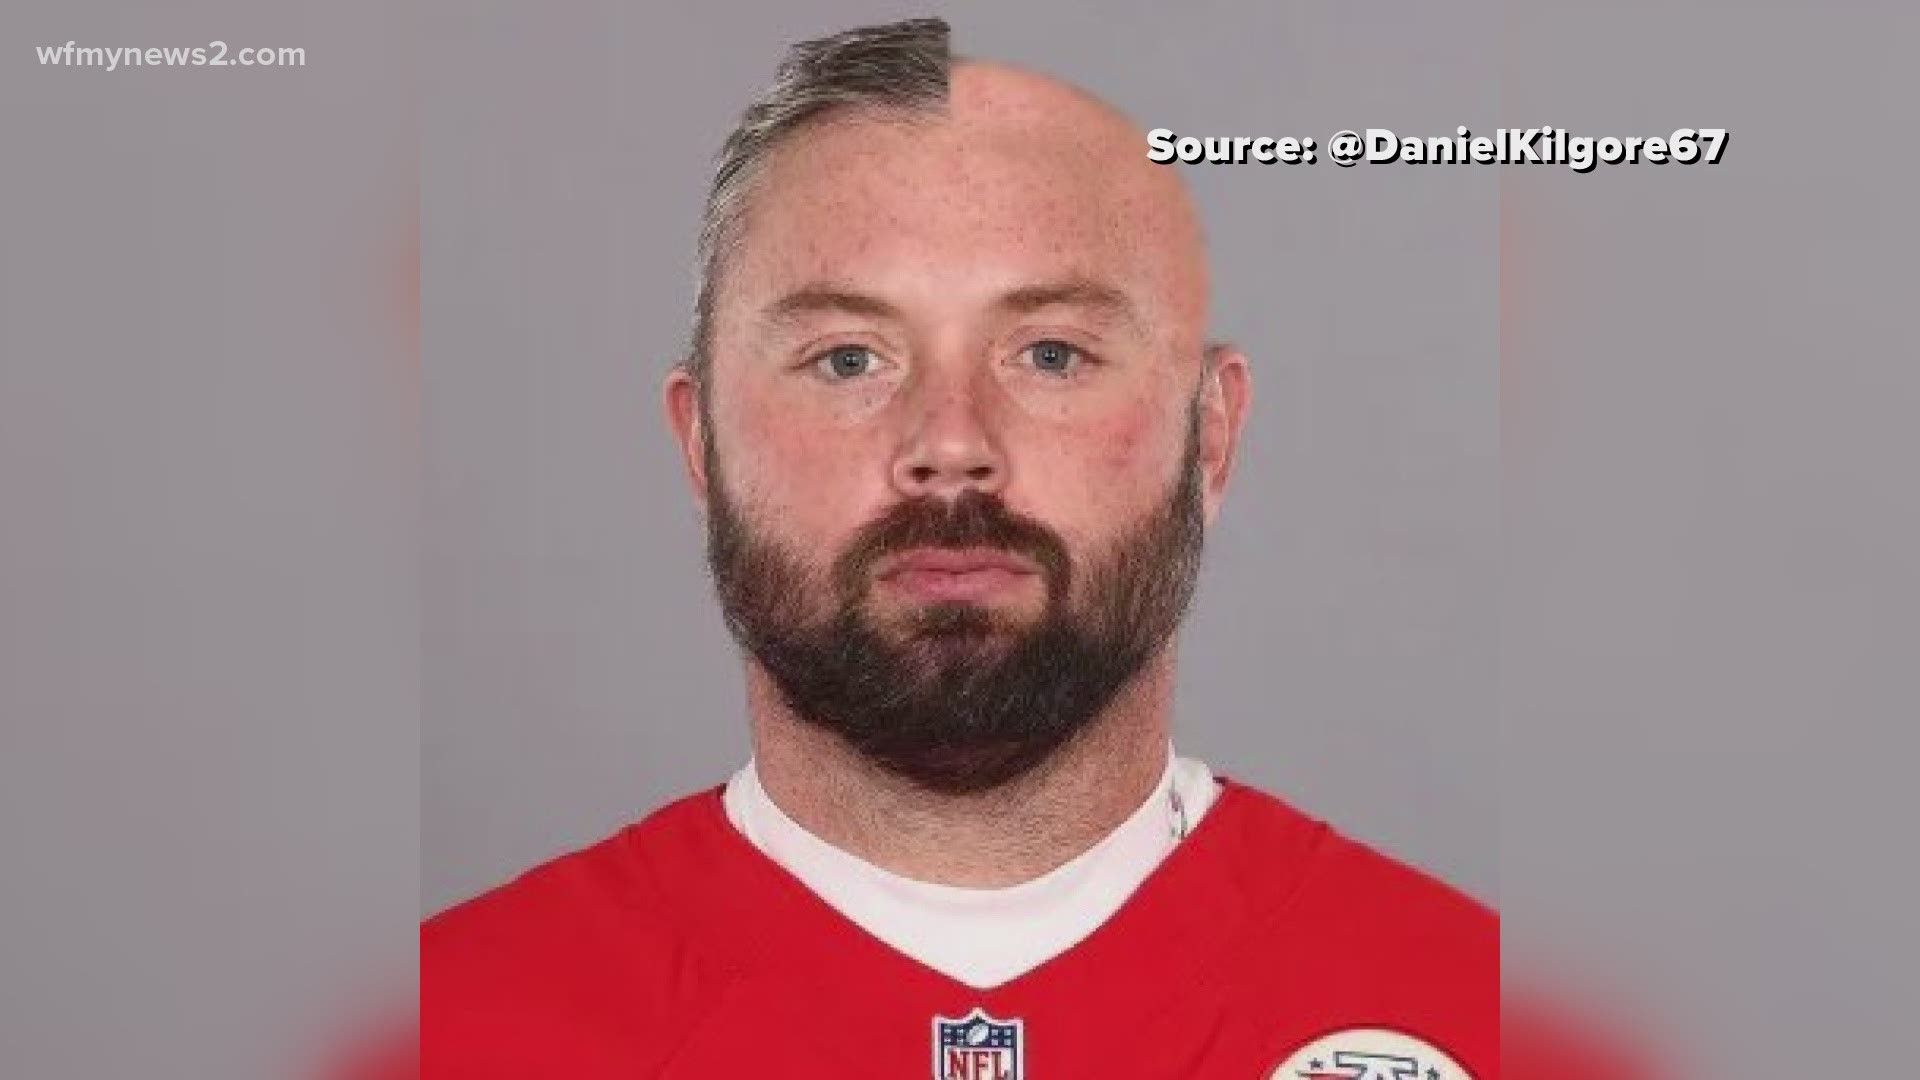 Kansas City Chiefs center Daniel Kilgore left halfway through a hair cut after finding out his barber tested positive for COVID-19.